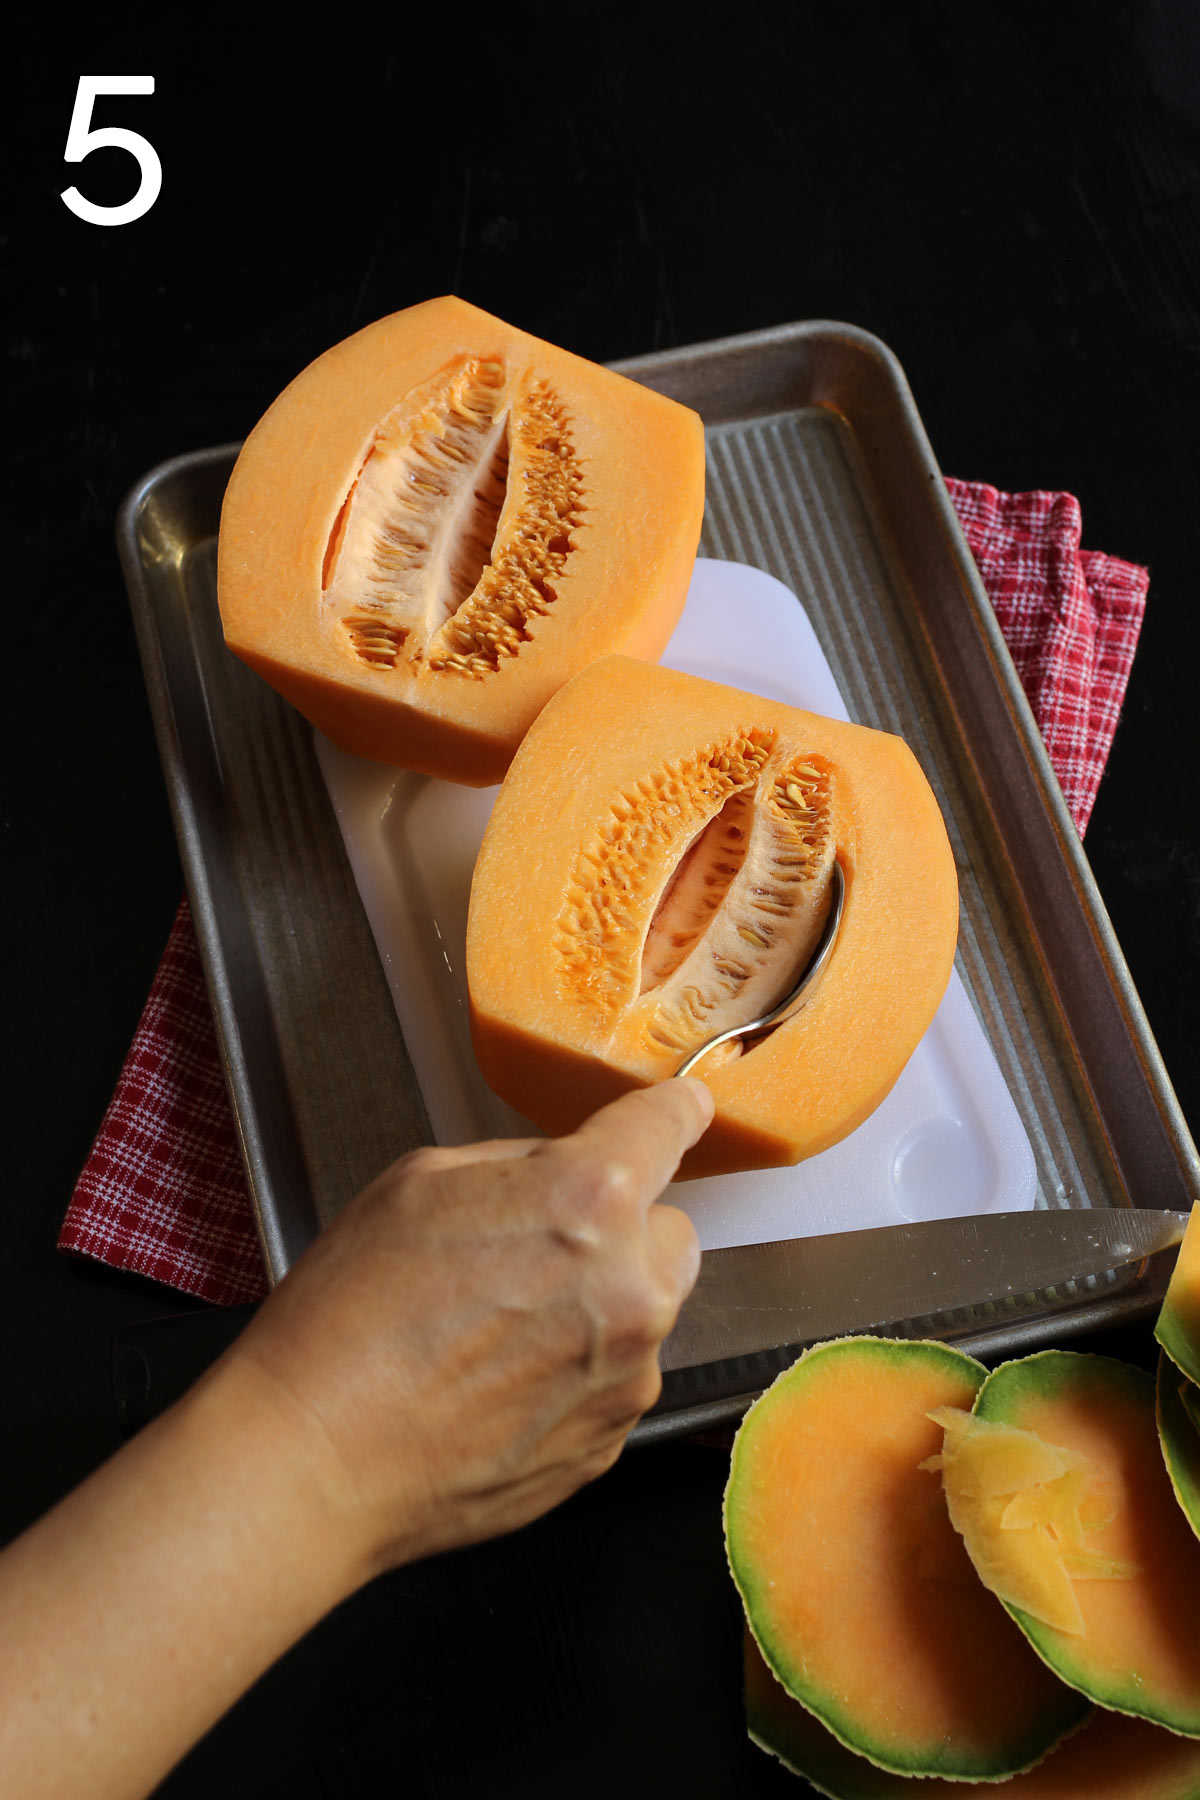 inserting spoon into center of melon to scrape out seeds.